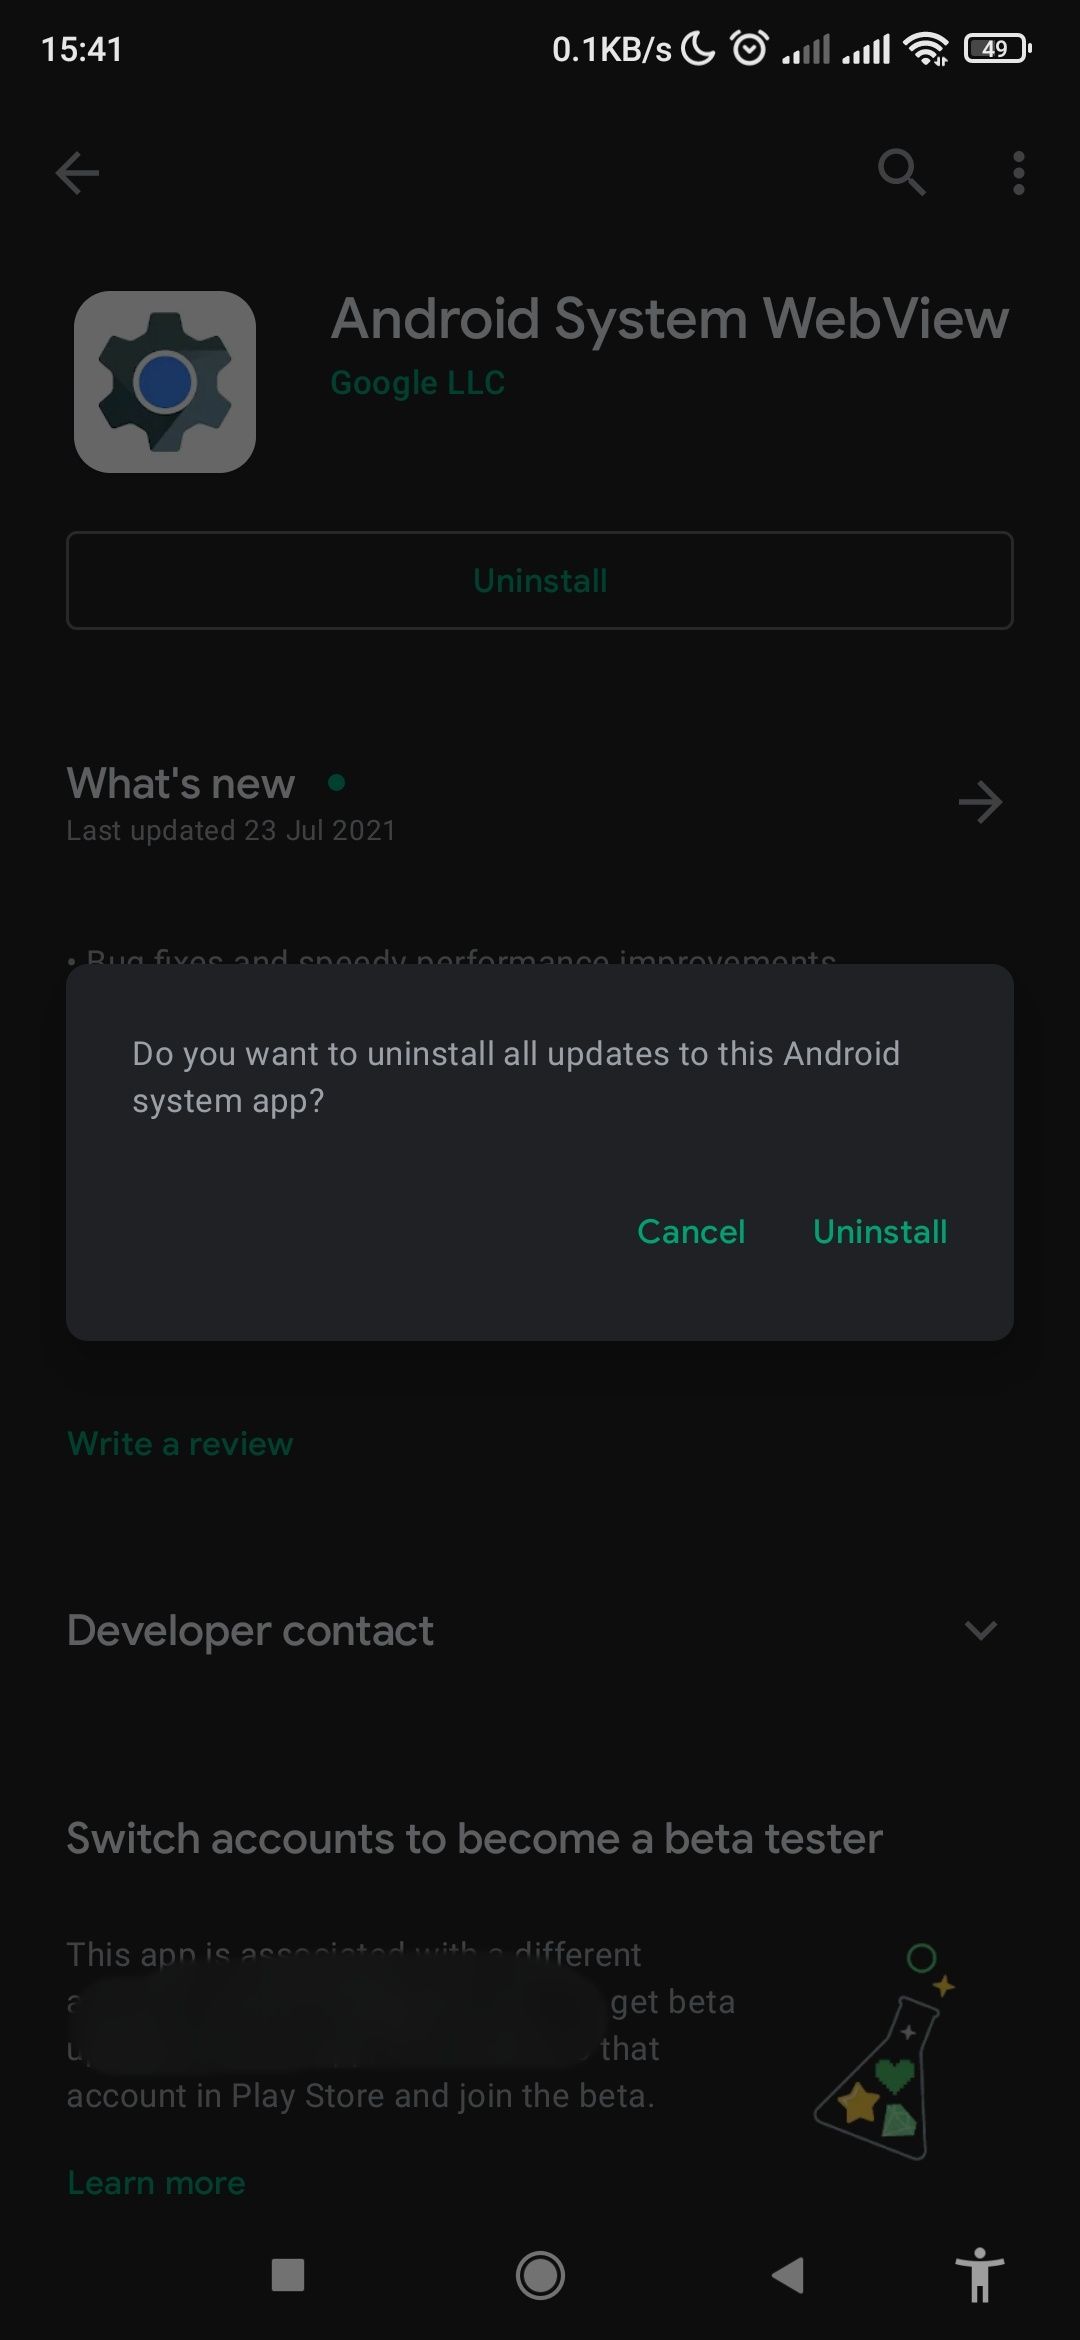 Uninstalling Android System Webview update